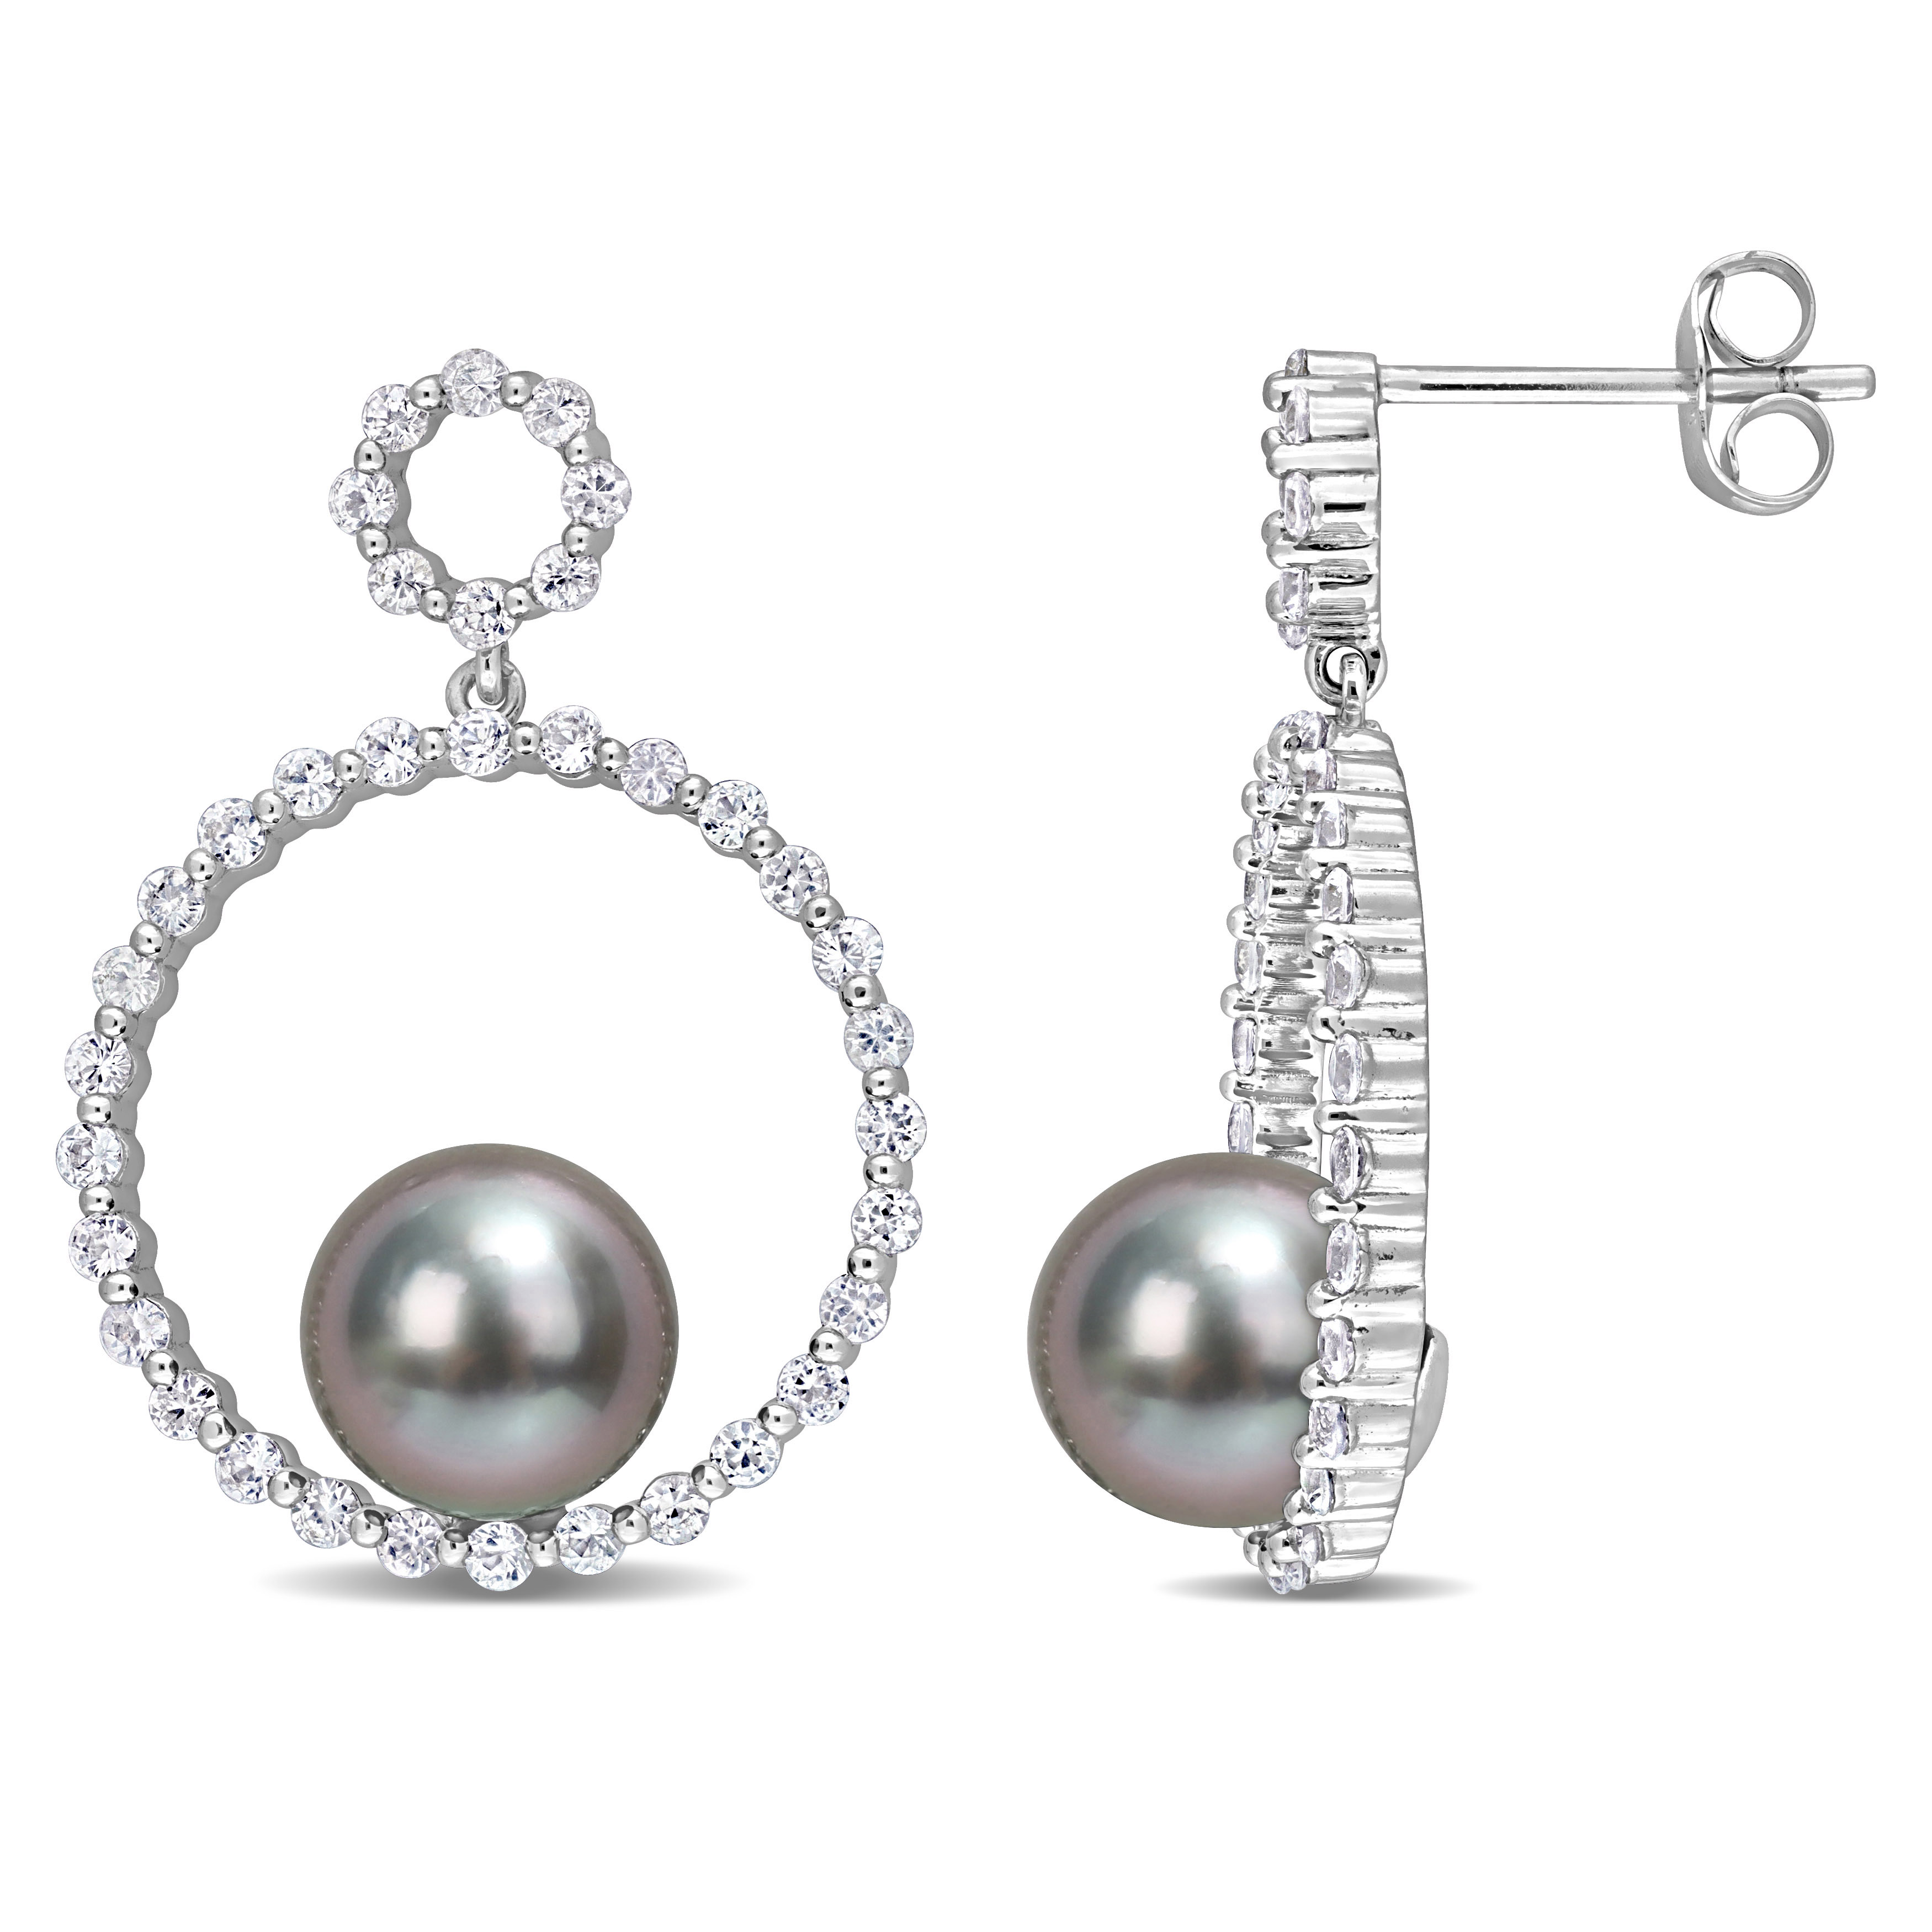 8-8.5 MM Black Tahitian Cultured Pearl and 1 1/10 CT TGW White Sapphire Circle Earrings in 10k White Gold